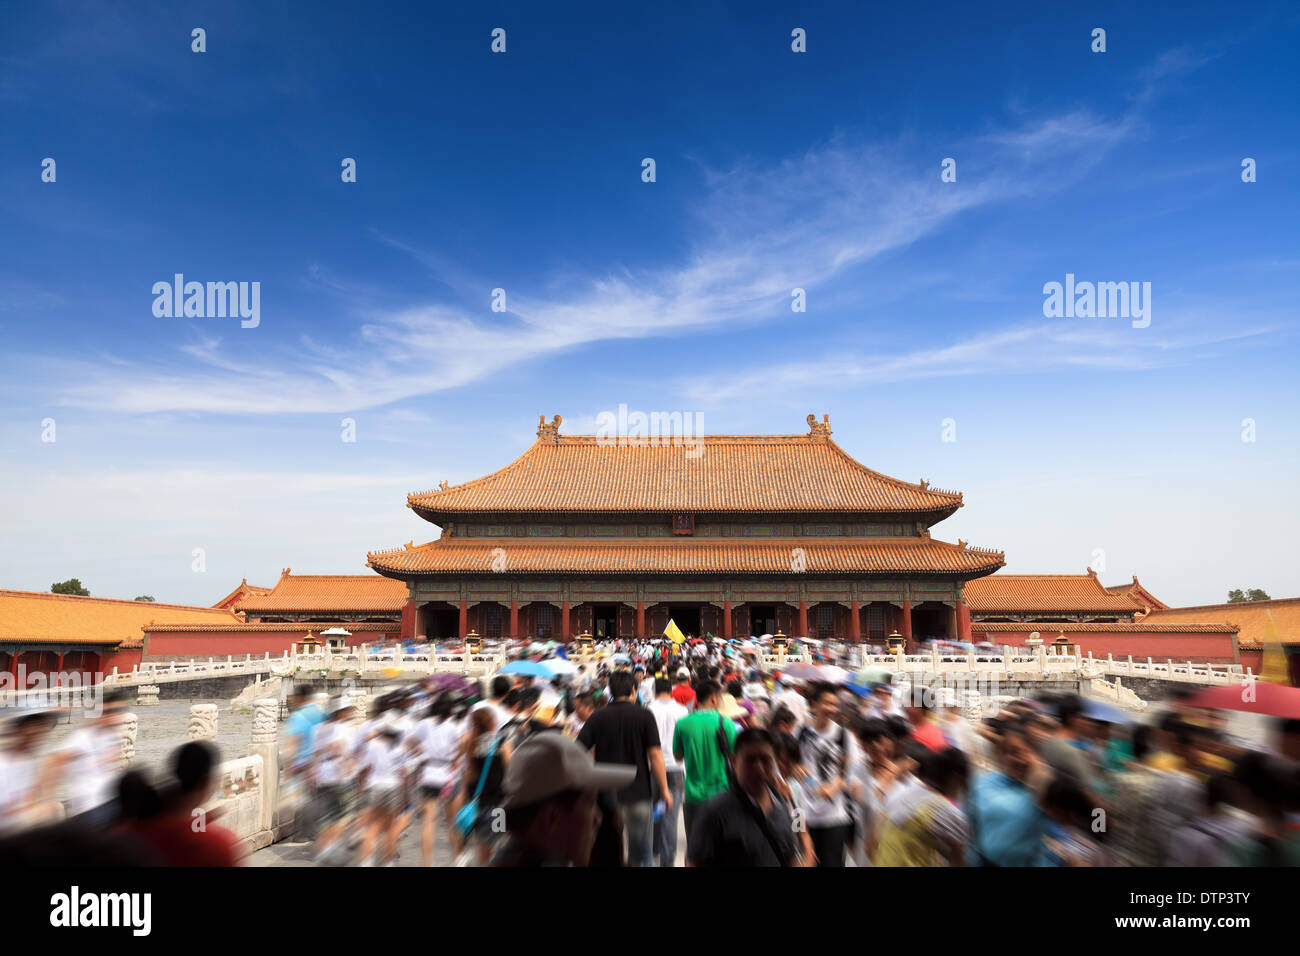 palace of heavenly purity in beijing Stock Photo